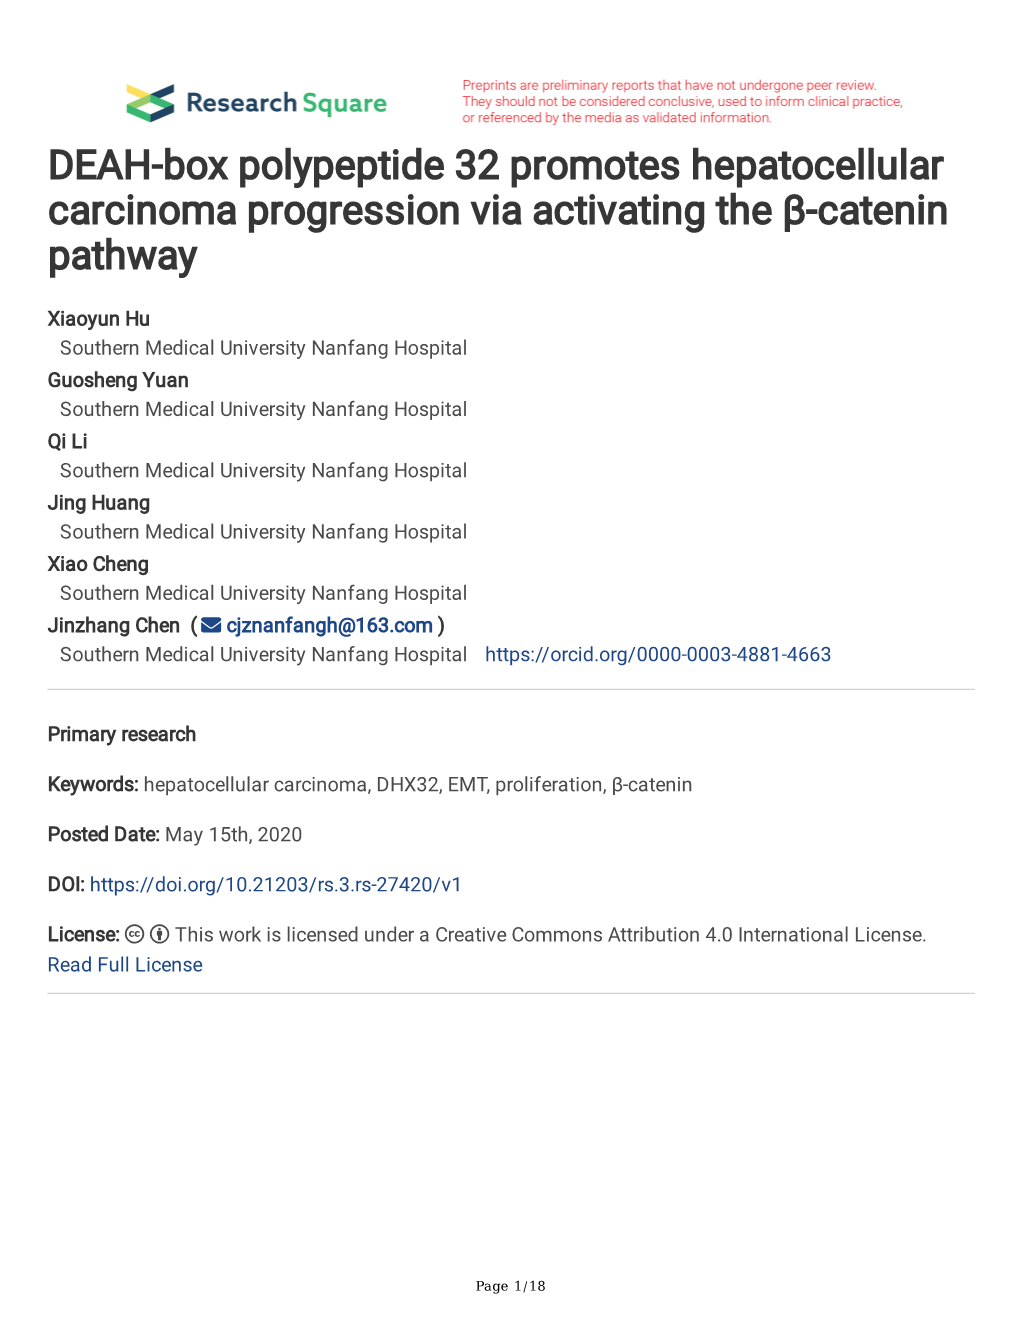 DEAH-Box Polypeptide 32 Promotes Hepatocellular Carcinoma Progression Via Activating the Β-Catenin Pathway